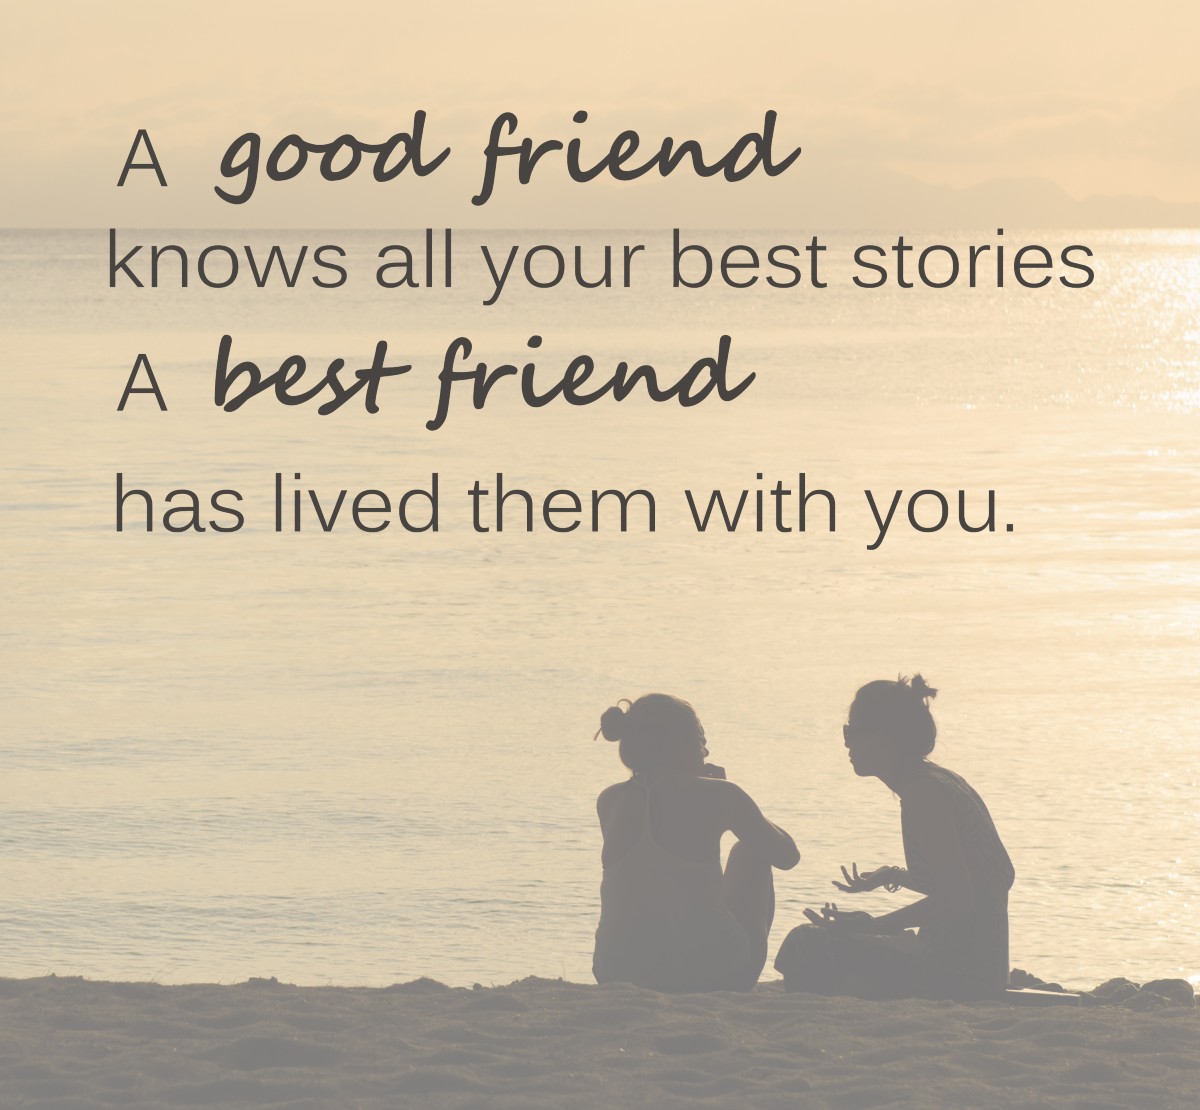 Happy Friendship Day 2021: Images, Wishes, Quotes, Messages and WhatsApp  Greetings to Share